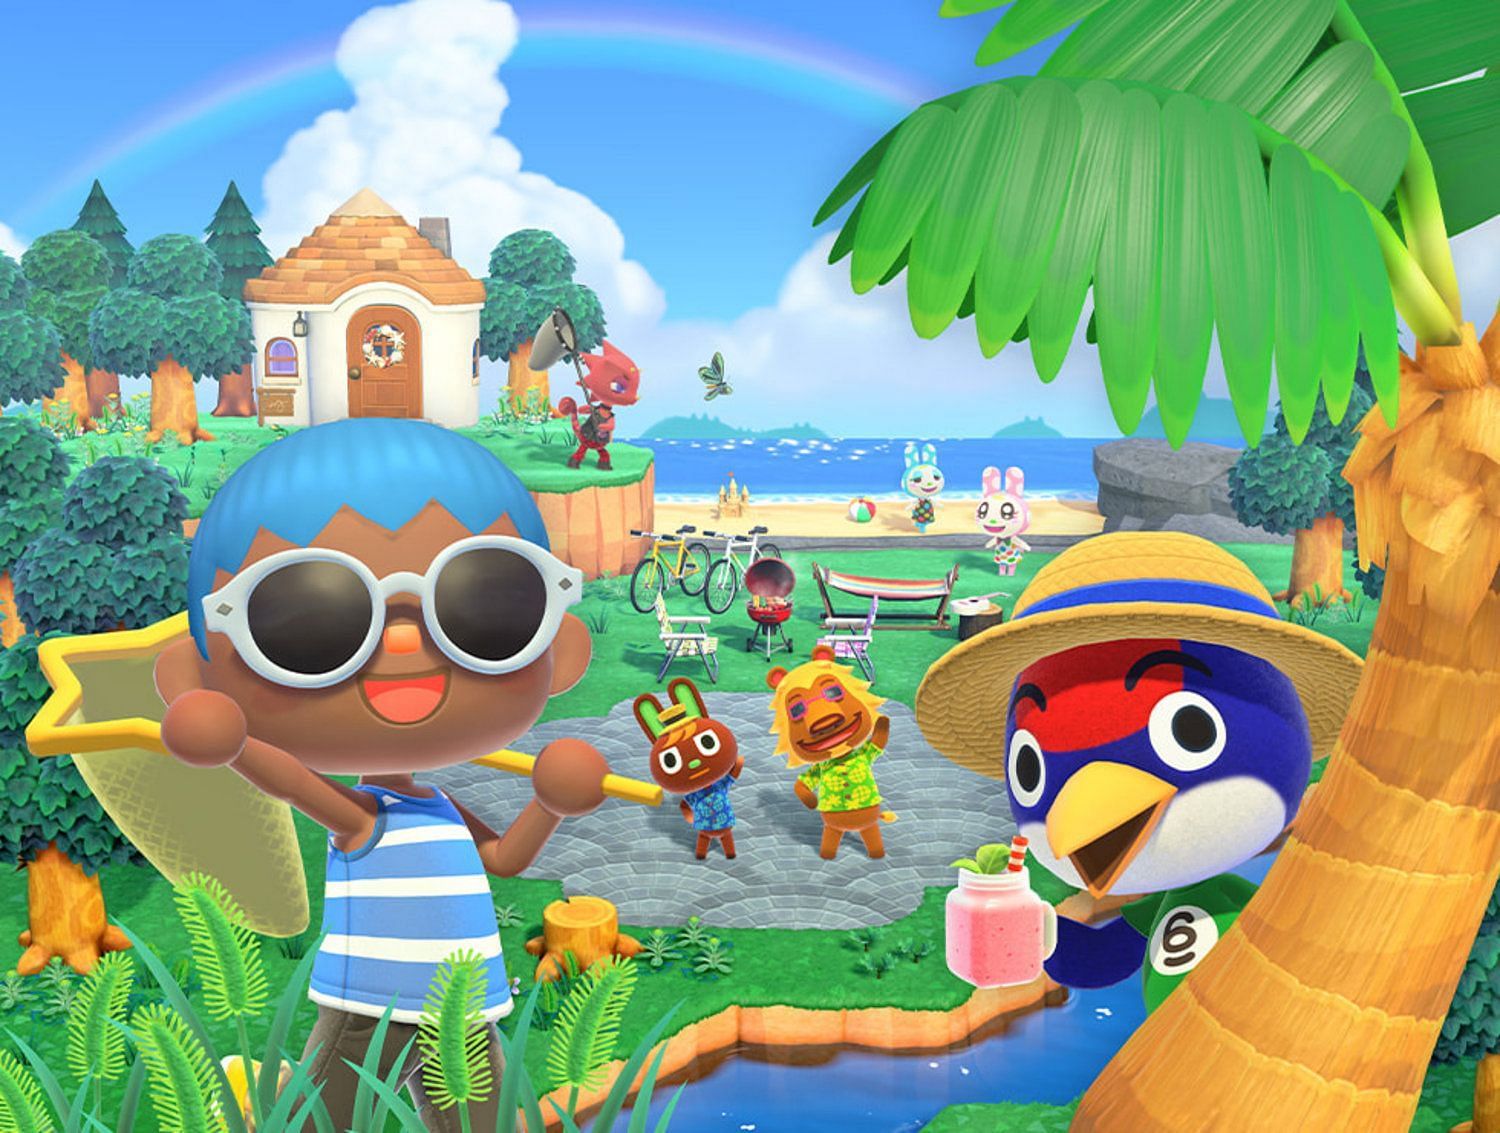 Secrets Animal Crossing: New Horizons players should know before they start (Image via Nintendo)